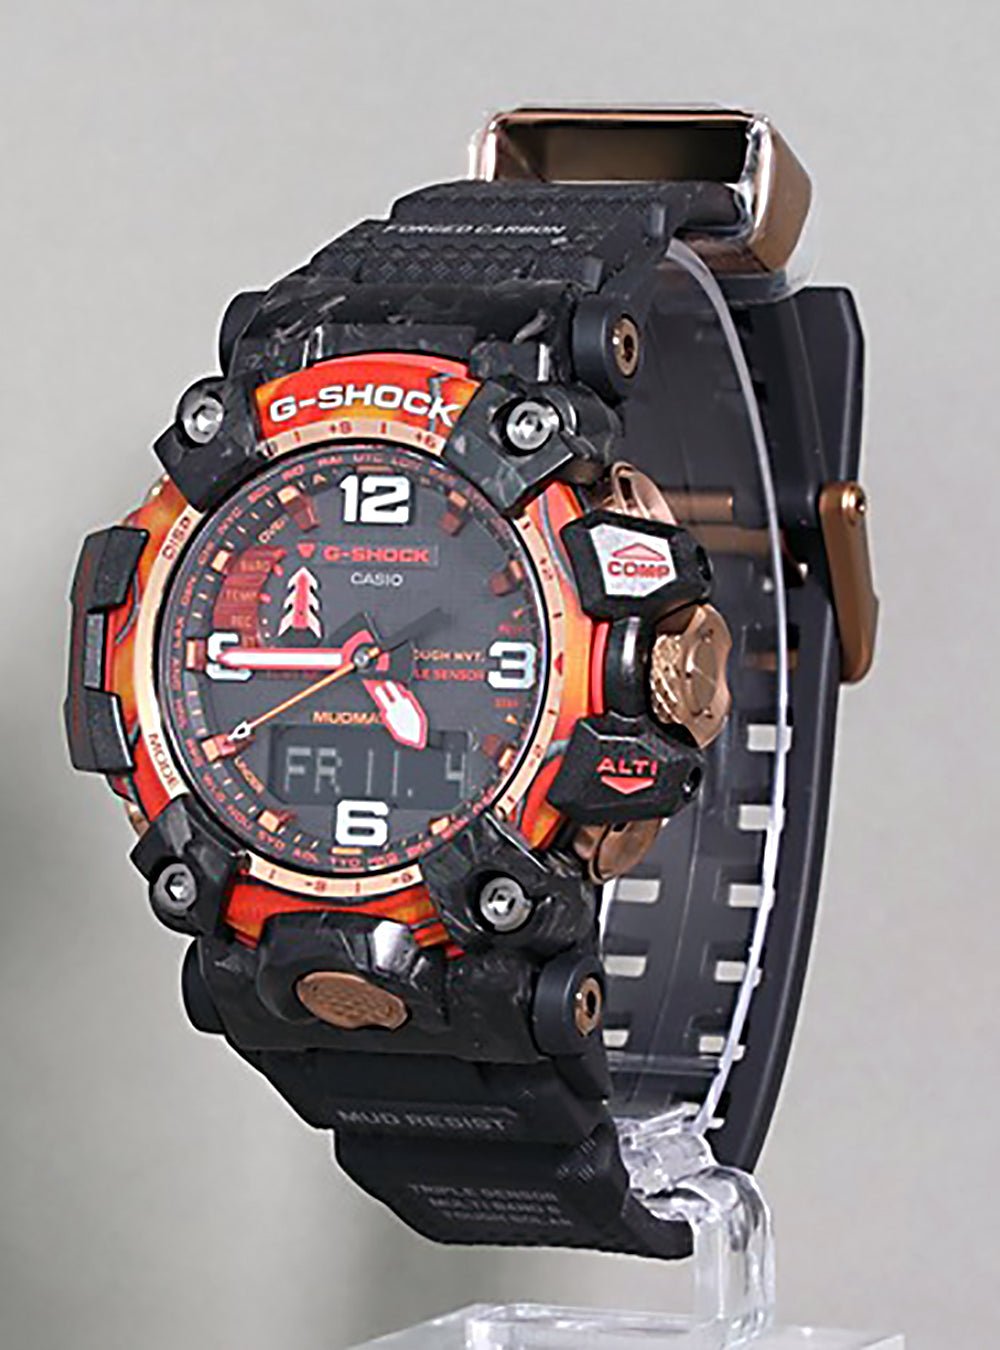 CASIO G-SHOCK 40TH ANNIVERSARY FLARE RED MASTER OF G - LAND MUDMASTER GWG-2040FR-1AJR LIMITED EDITION JAPAN MOV'T JDMWRISTWATCHjapan-select